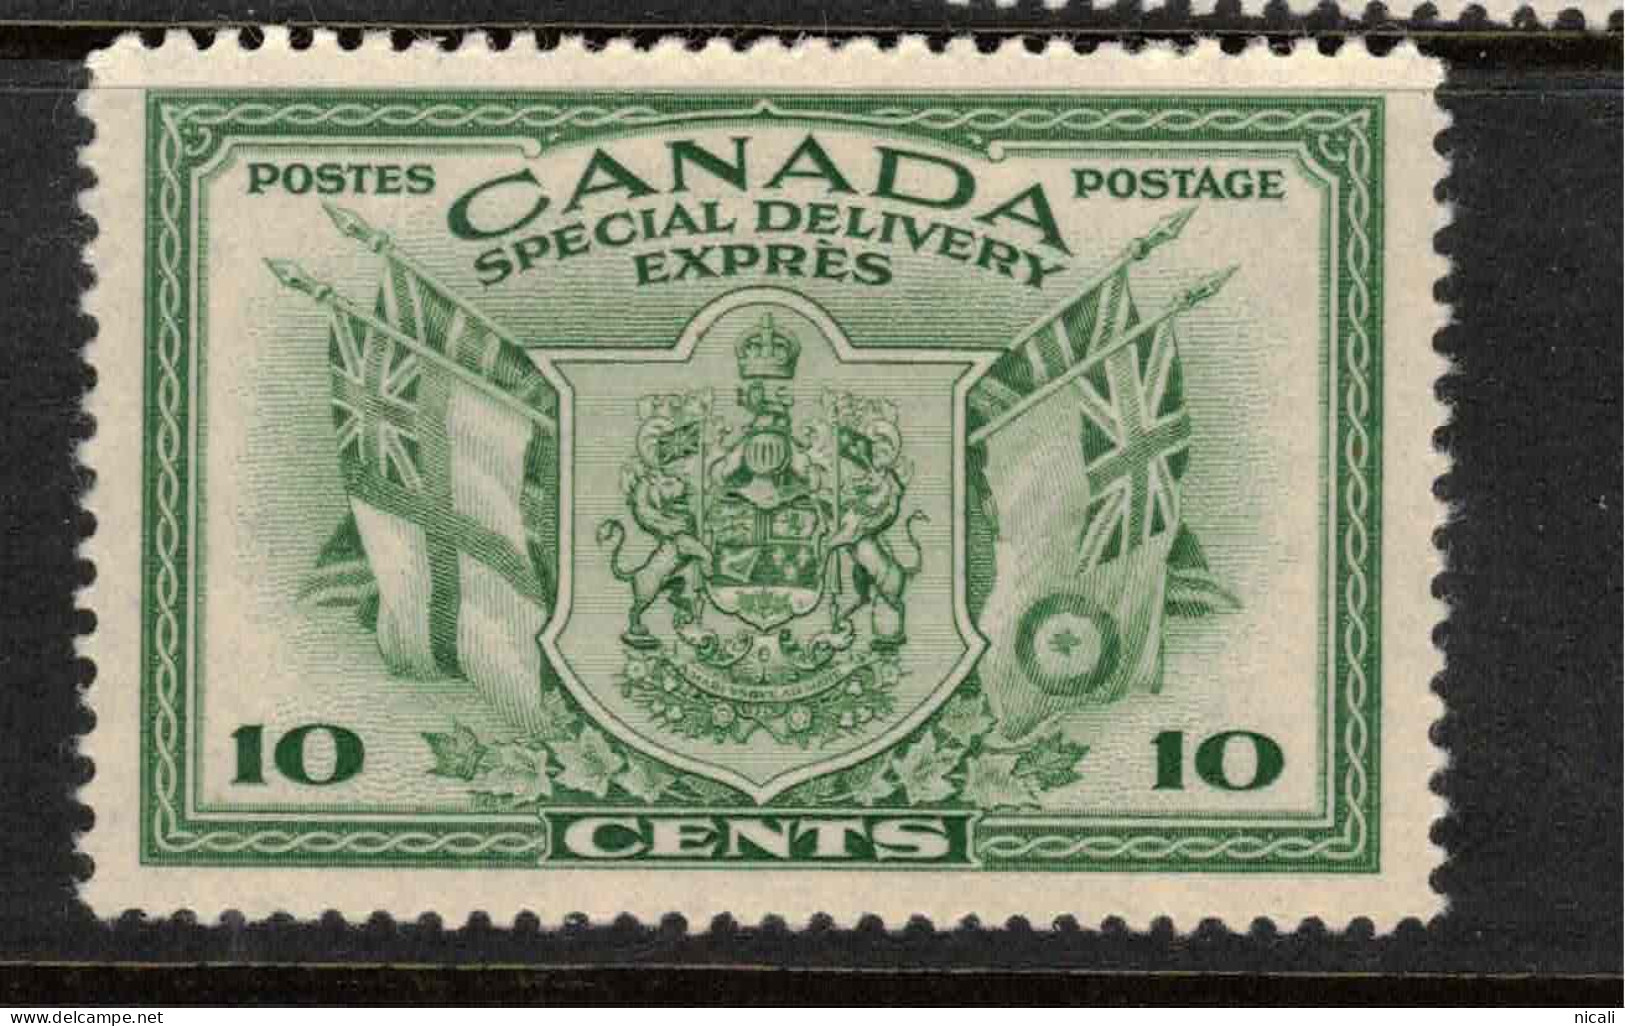 CANADA 1942 10c Special Delivery SG S12 HM ZZ82 - Airmail: Special Delivery